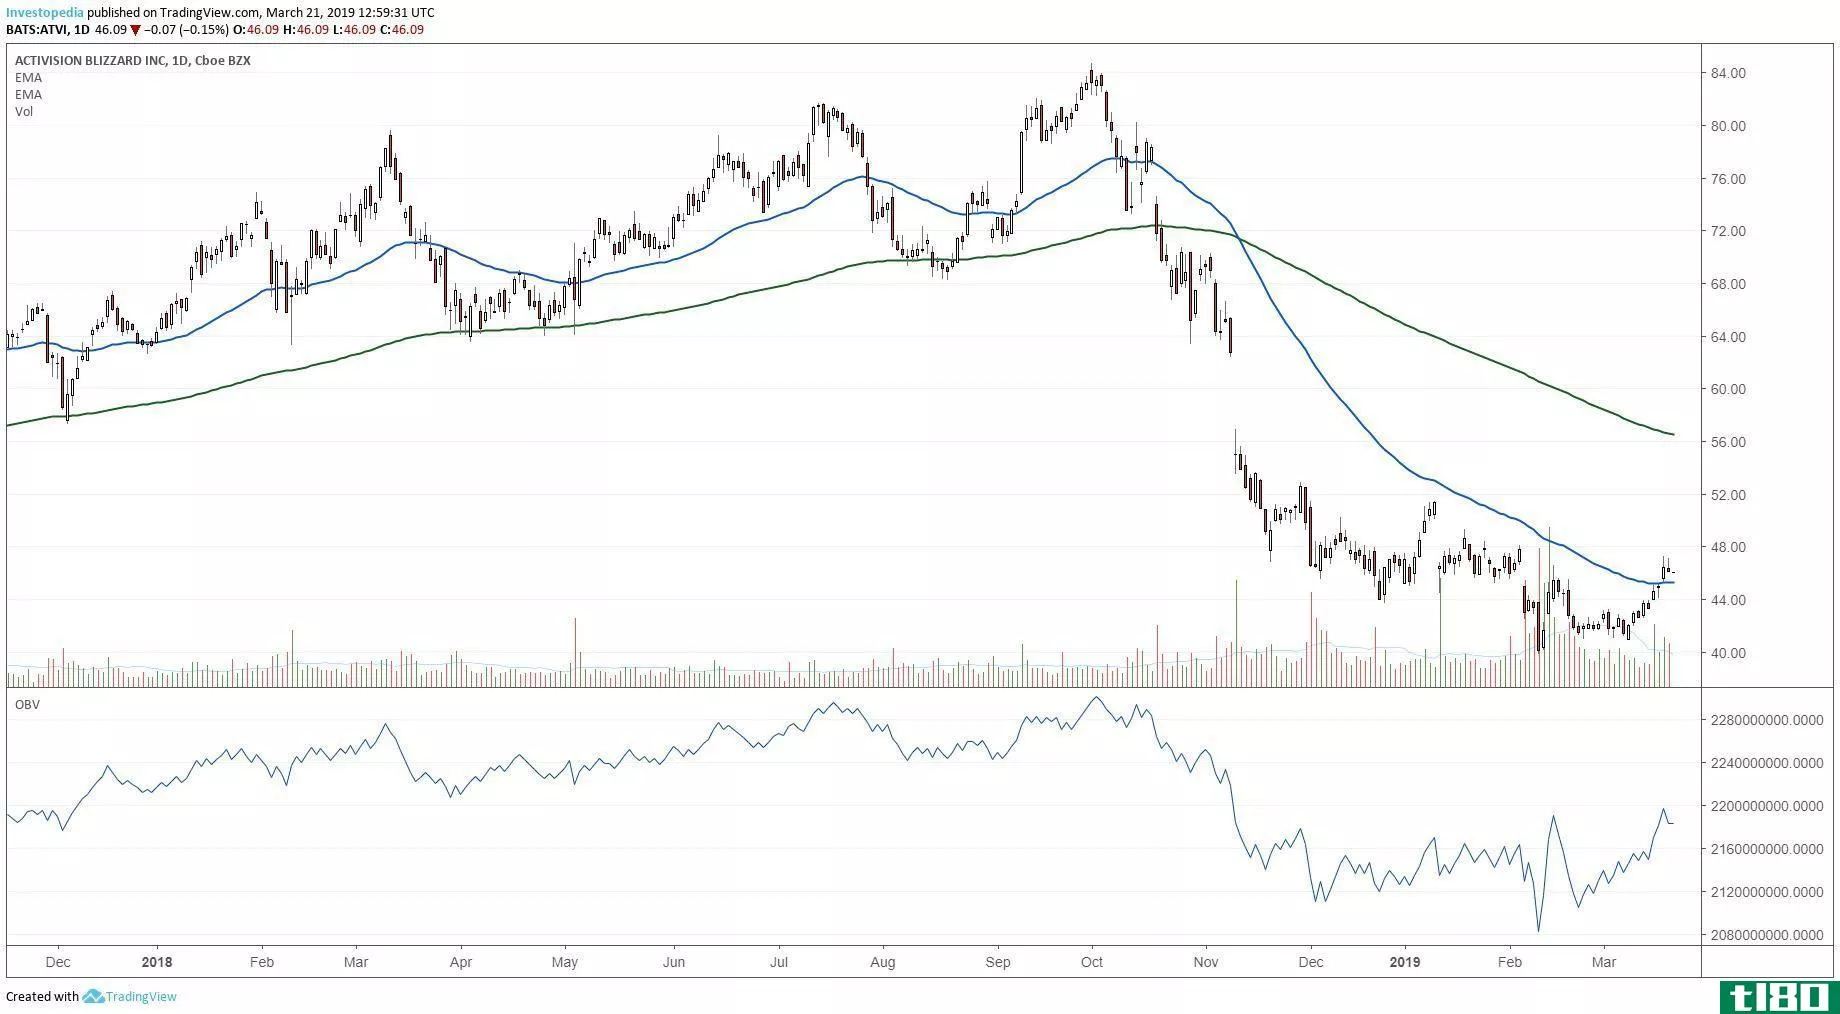 Technical chart showing the performance of Activision Blizzard, Inc. (ATVI)